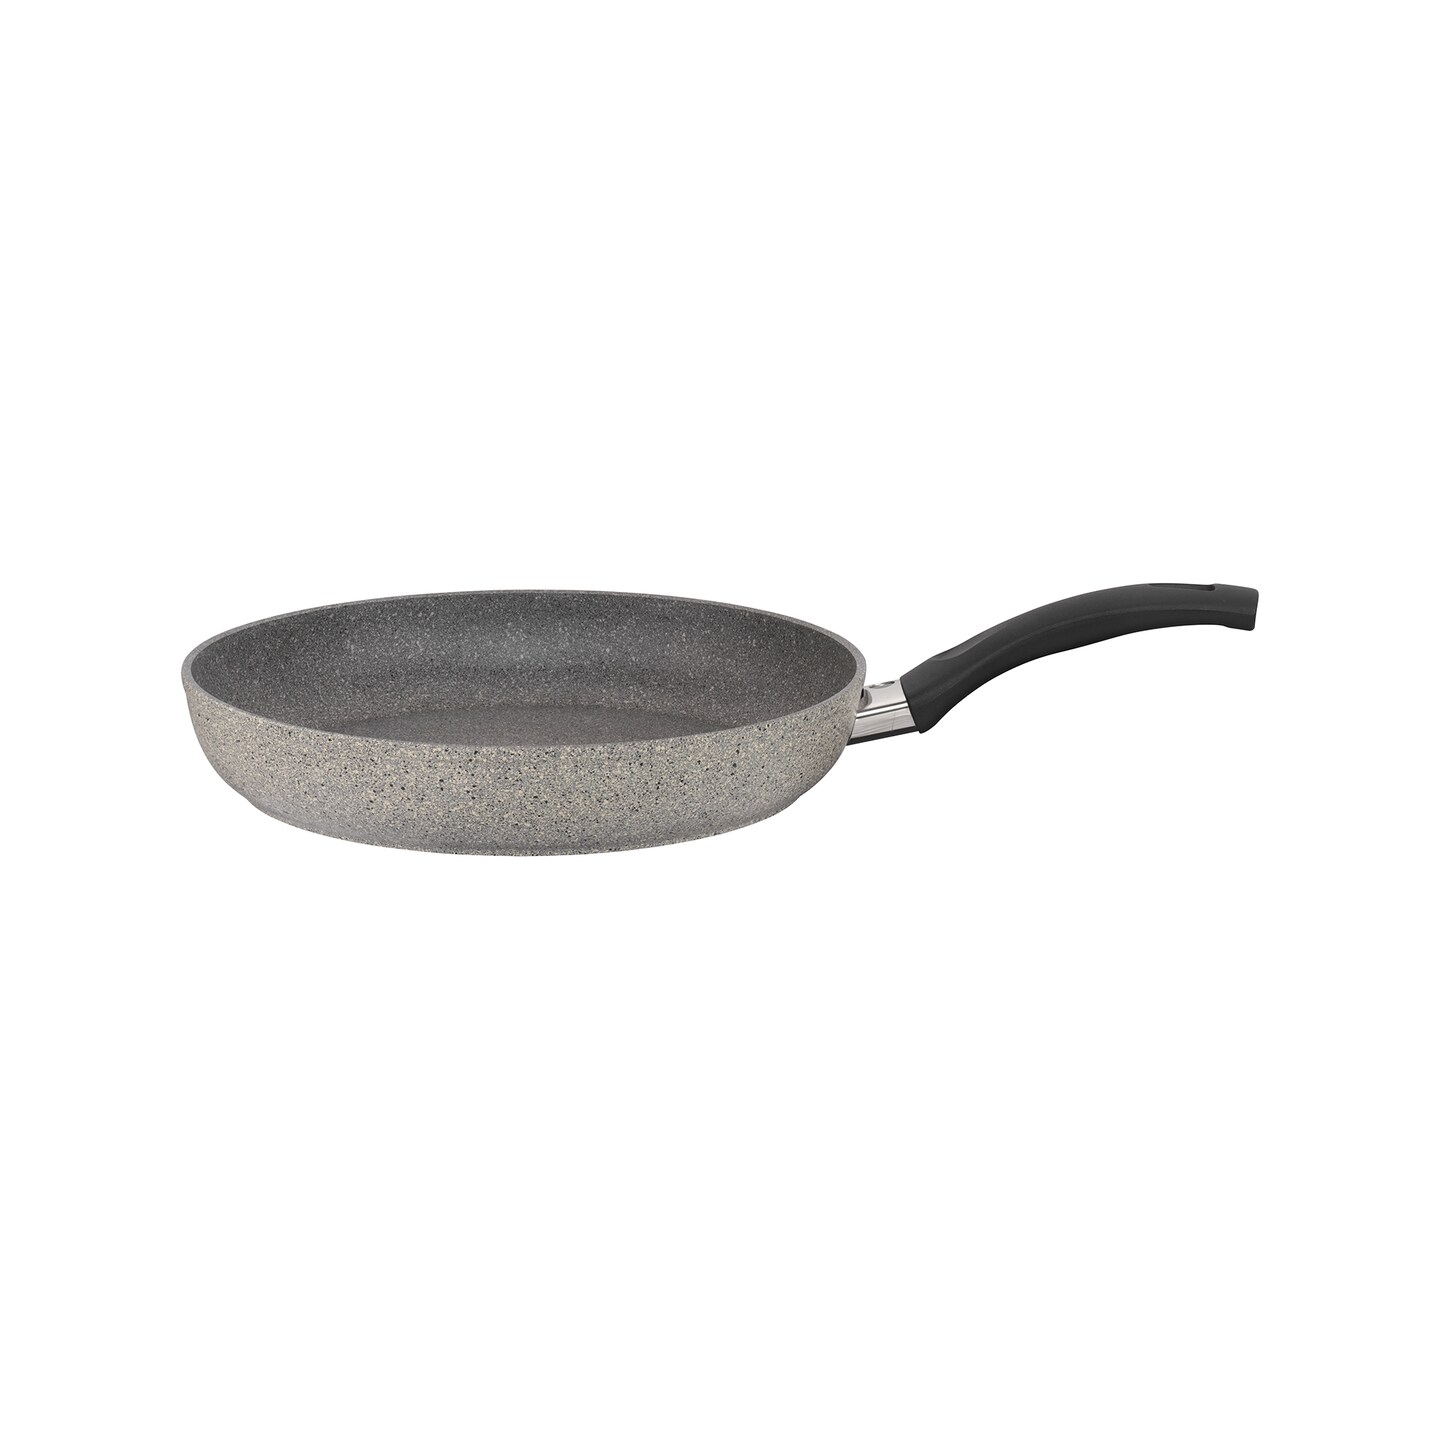 BALLARINI Parma by HENCKELS Forged Aluminum Nonstick Fry Pan, Made in Italy